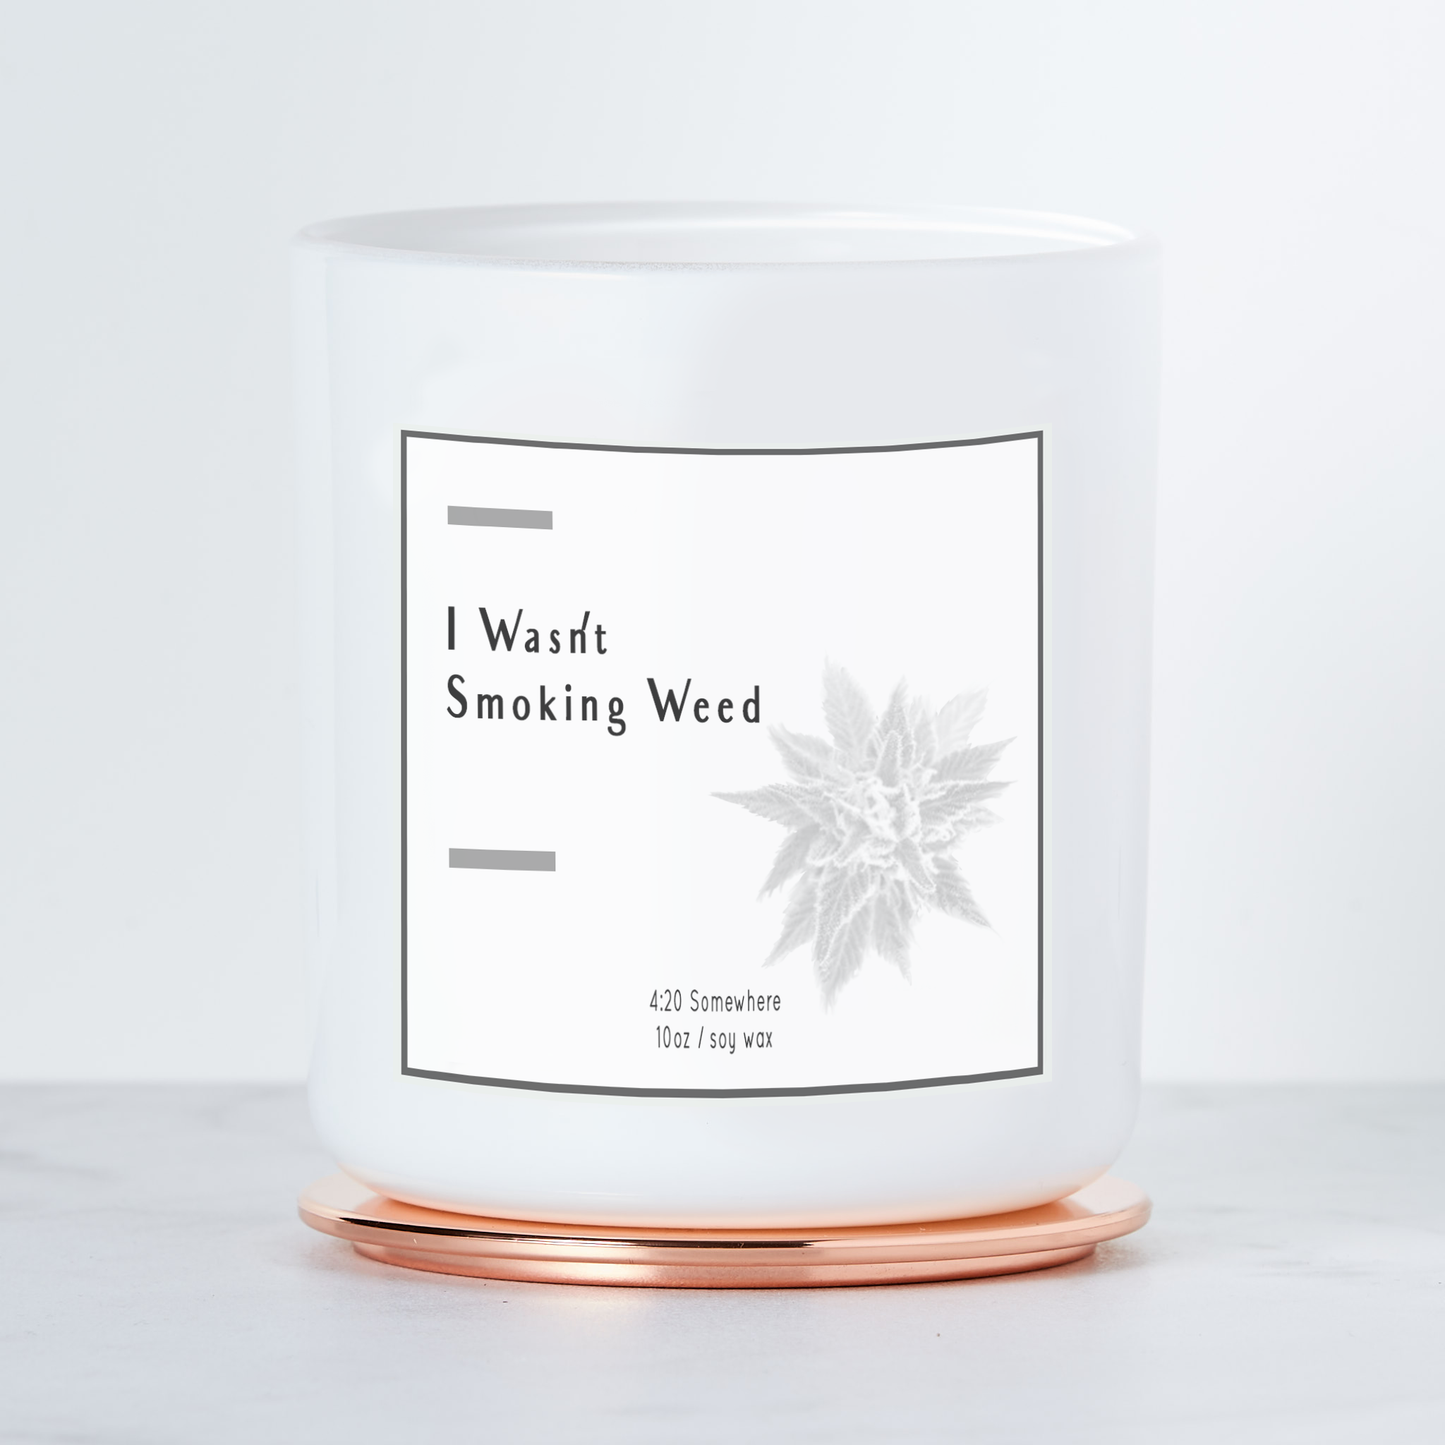 I Wasn't Smoking Weed - Luxe Scented Soy Candle